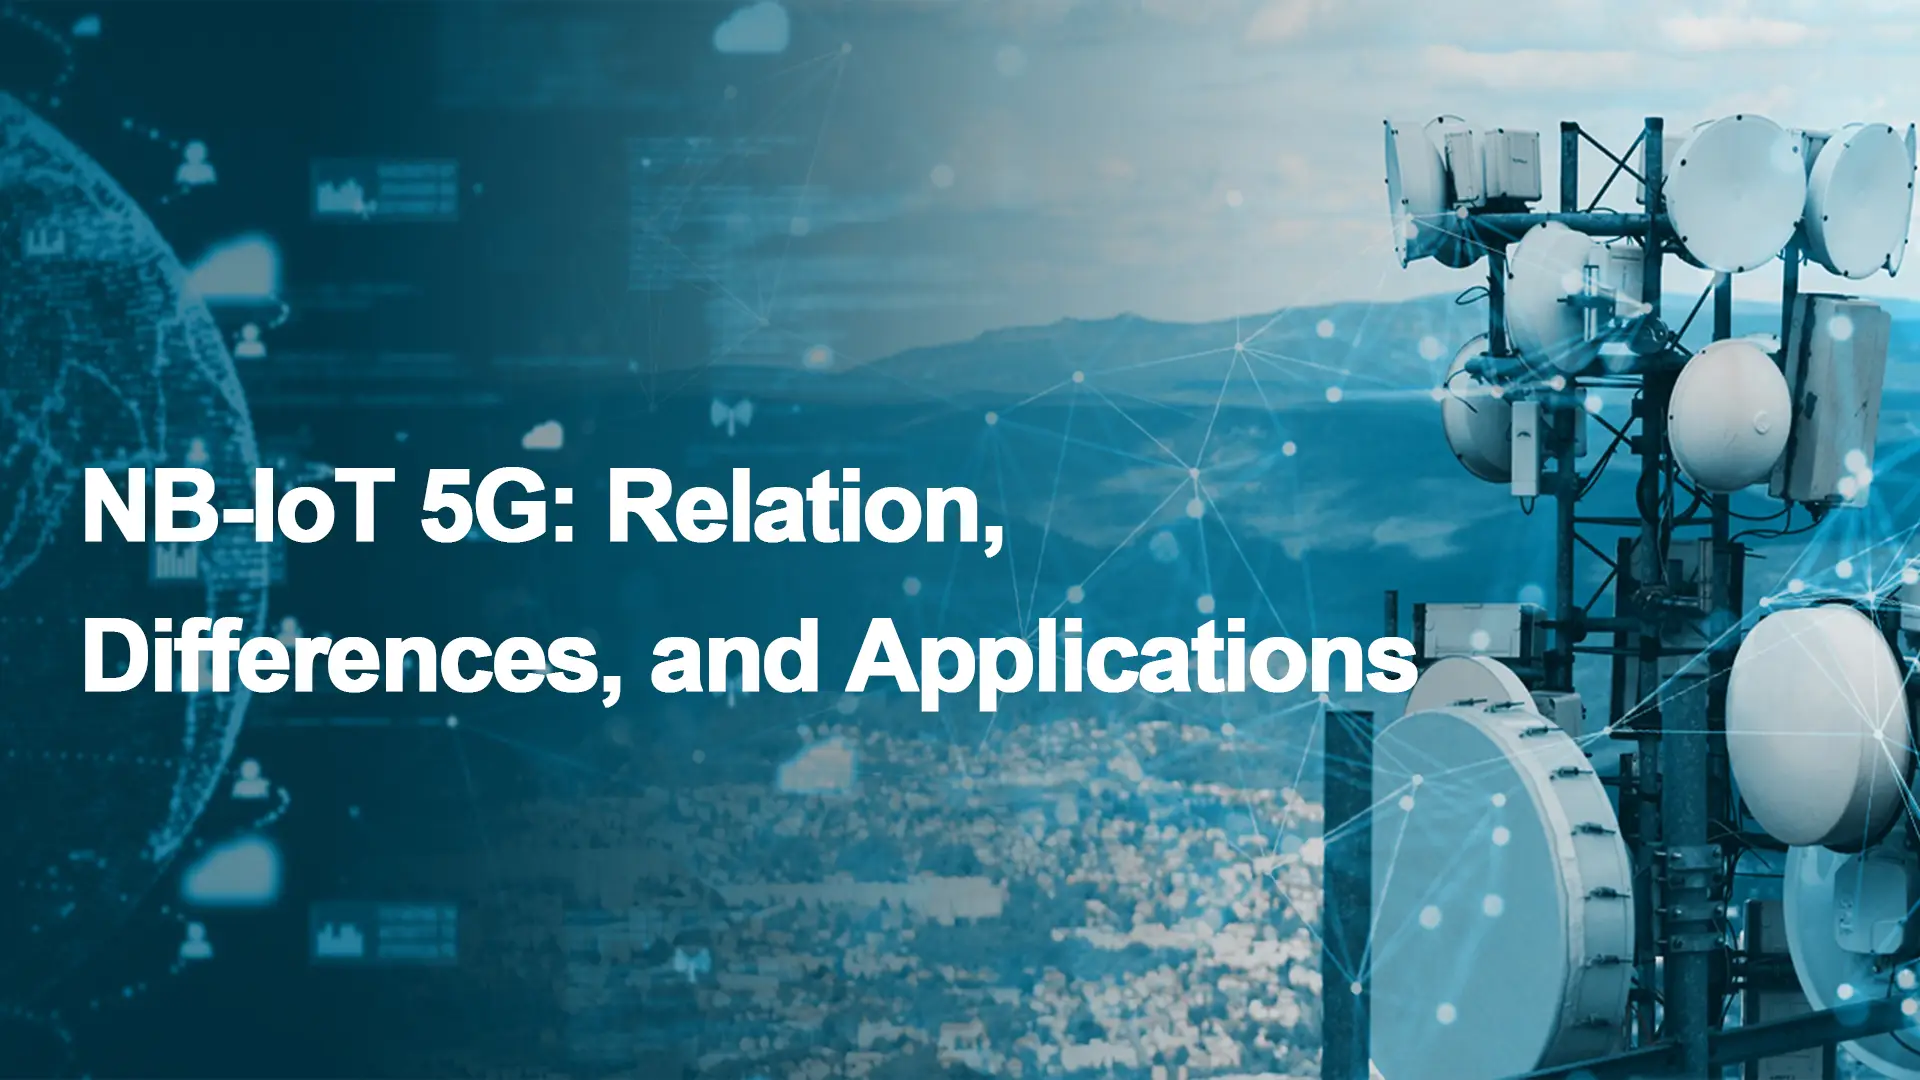 NB-IoT 5G Relation, Differences, and Applications